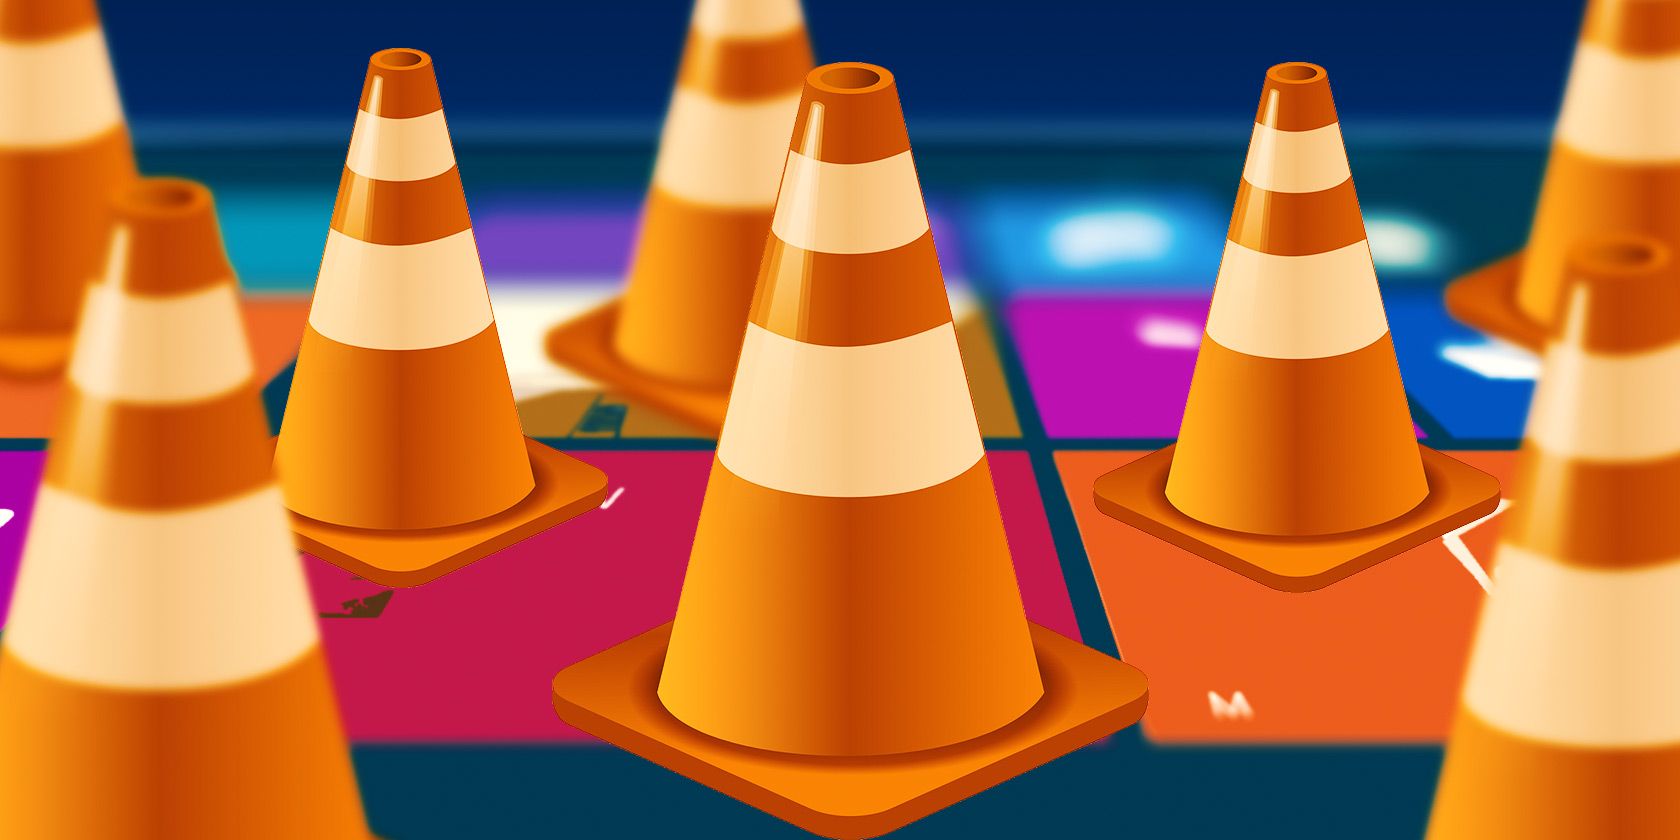 what is vlc media player windows 10